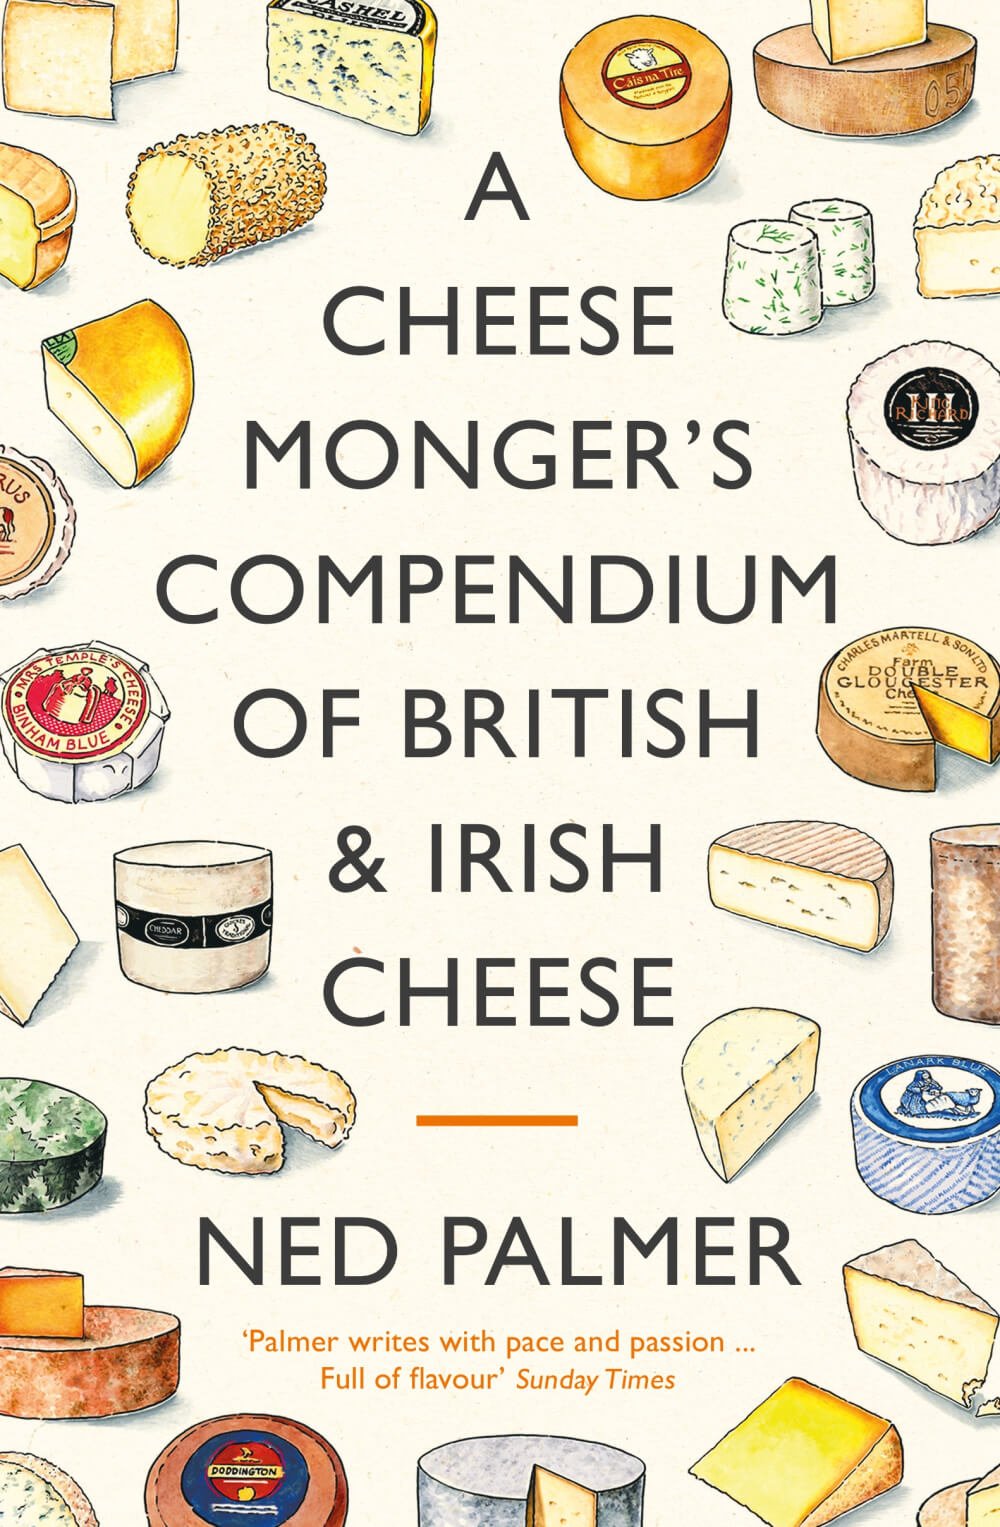 Really Grate: The Kathleen Thompson Hill Collection of Cheese